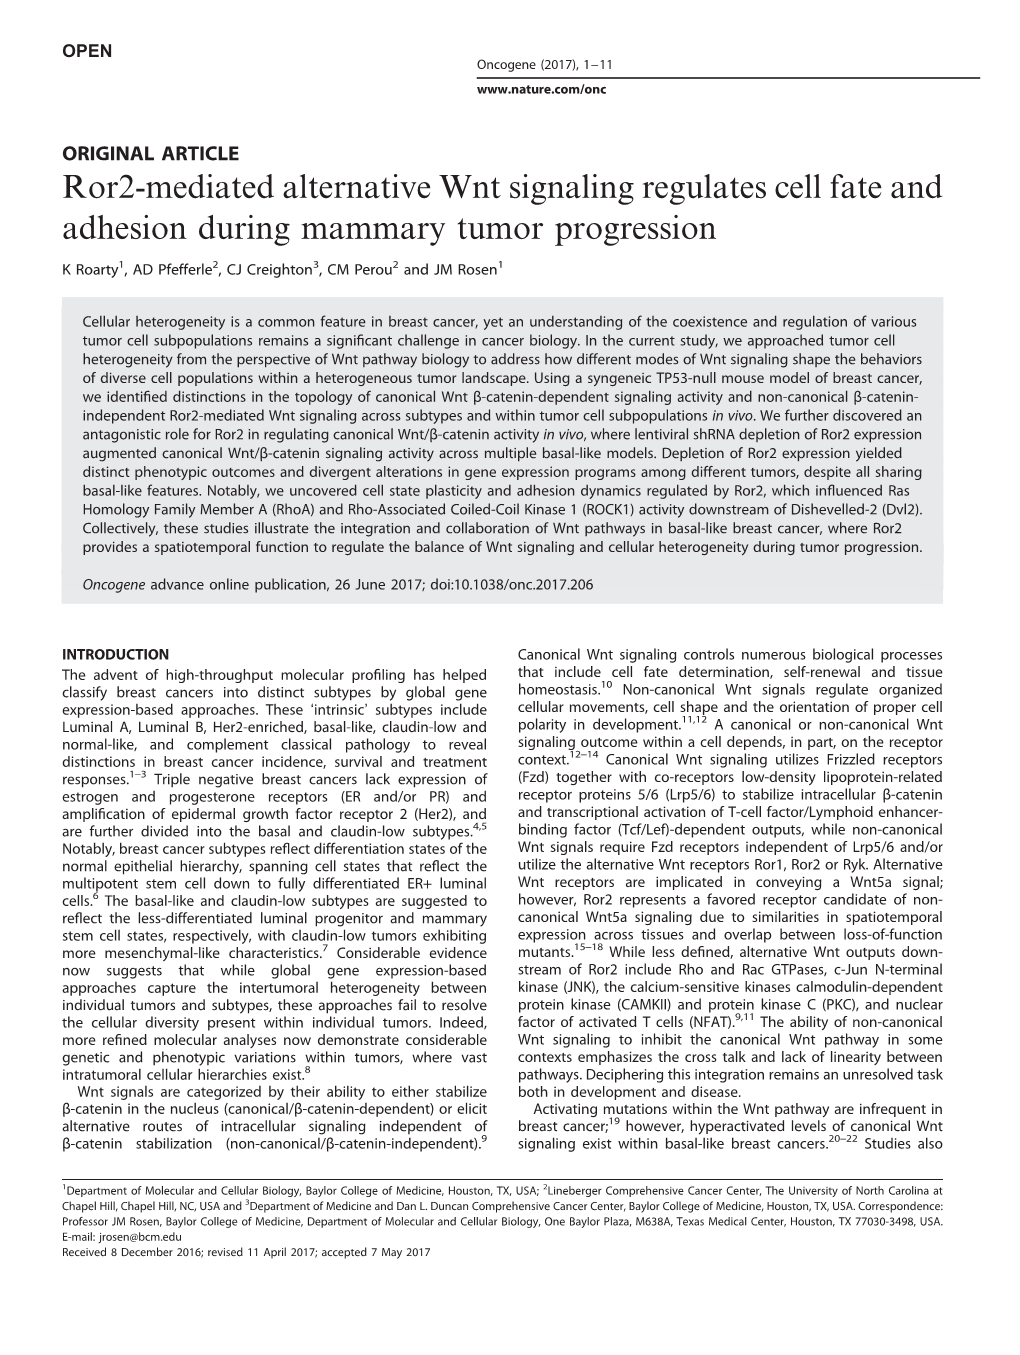 Ror2-Mediated Alternative Wnt Signaling Regulates Cell Fate and Adhesion During Mammary Tumor Progression